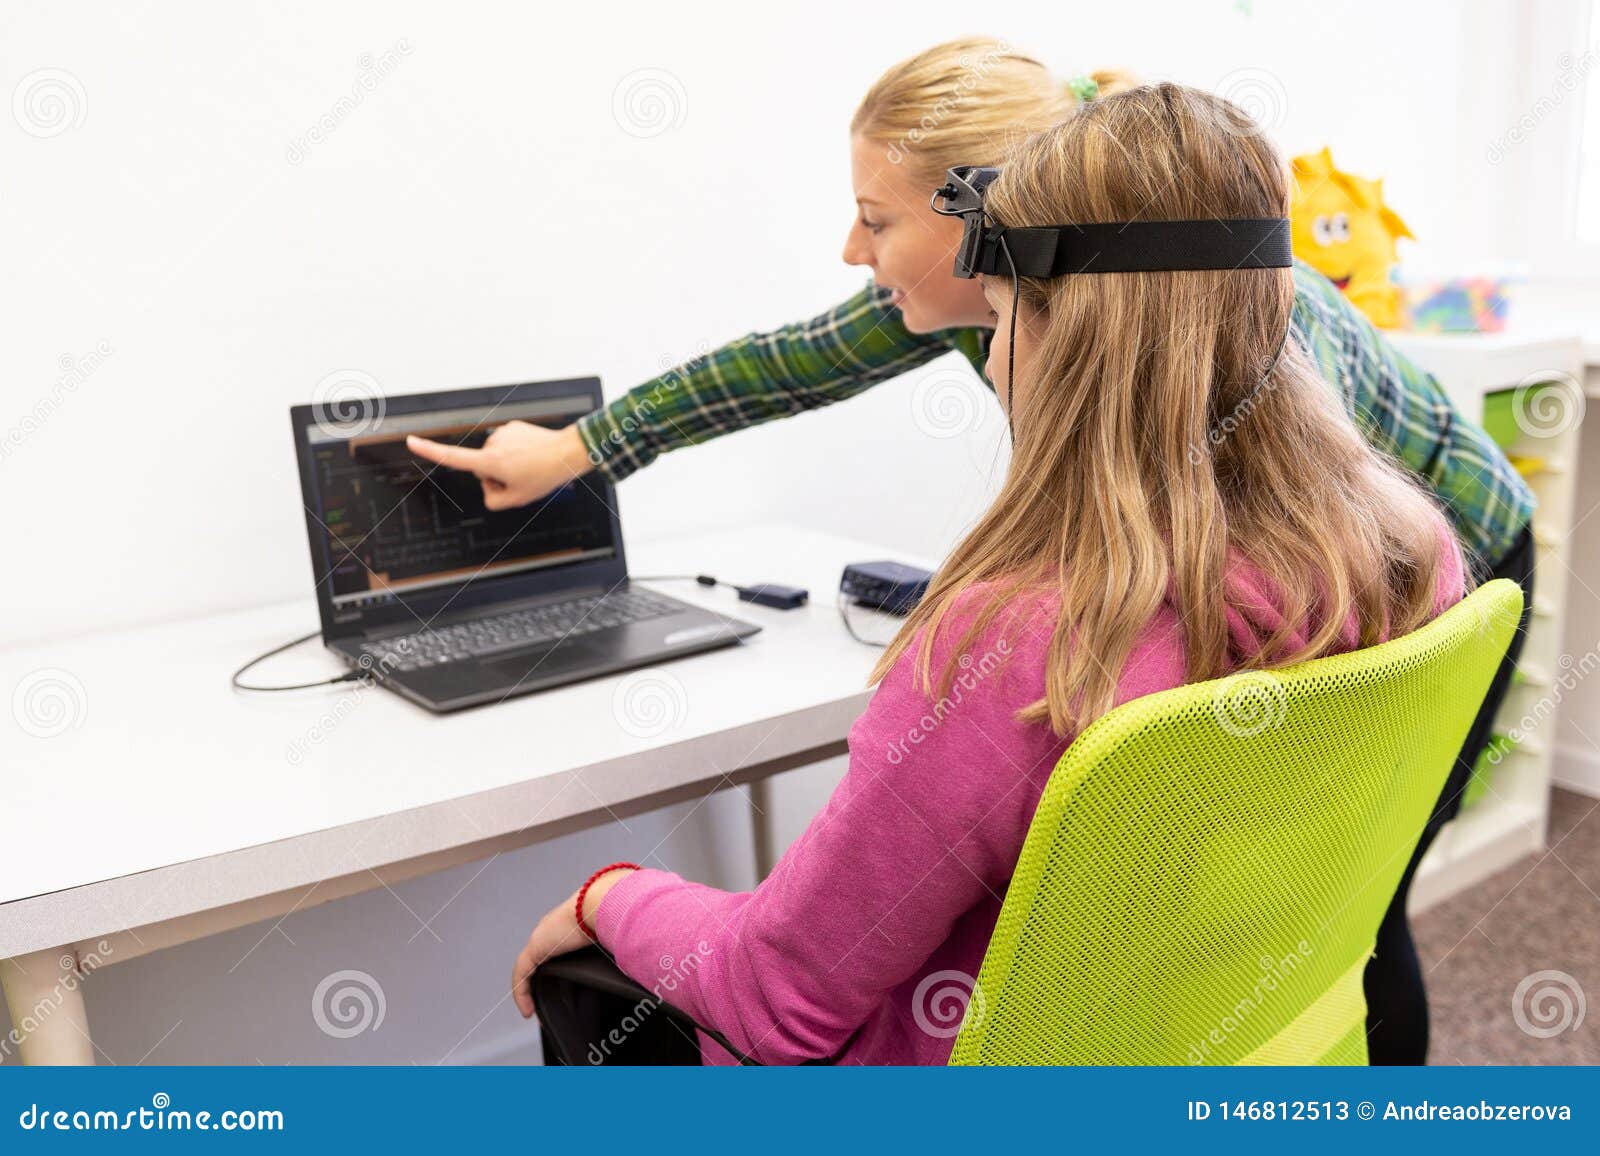 young teenage girl and child therapist during eeg neurofeedback session. electroencephalography concept.